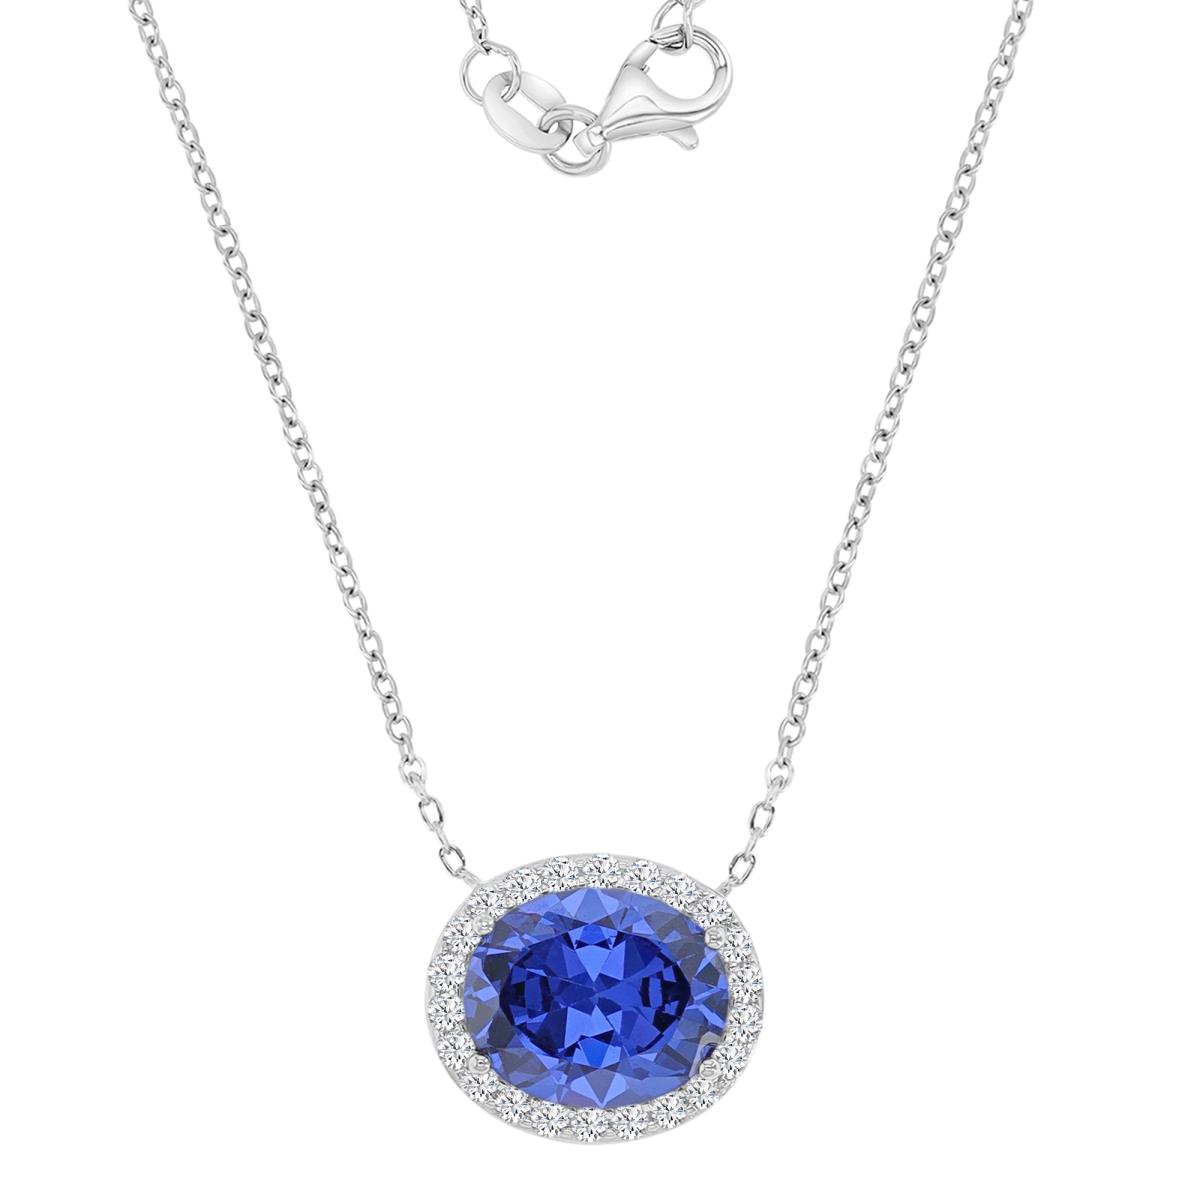 Sterling Silver Rhodium 15.6X13.4MM Polished Tanzanite & White CZ Oval Cut Pendant 18+2" Necklace